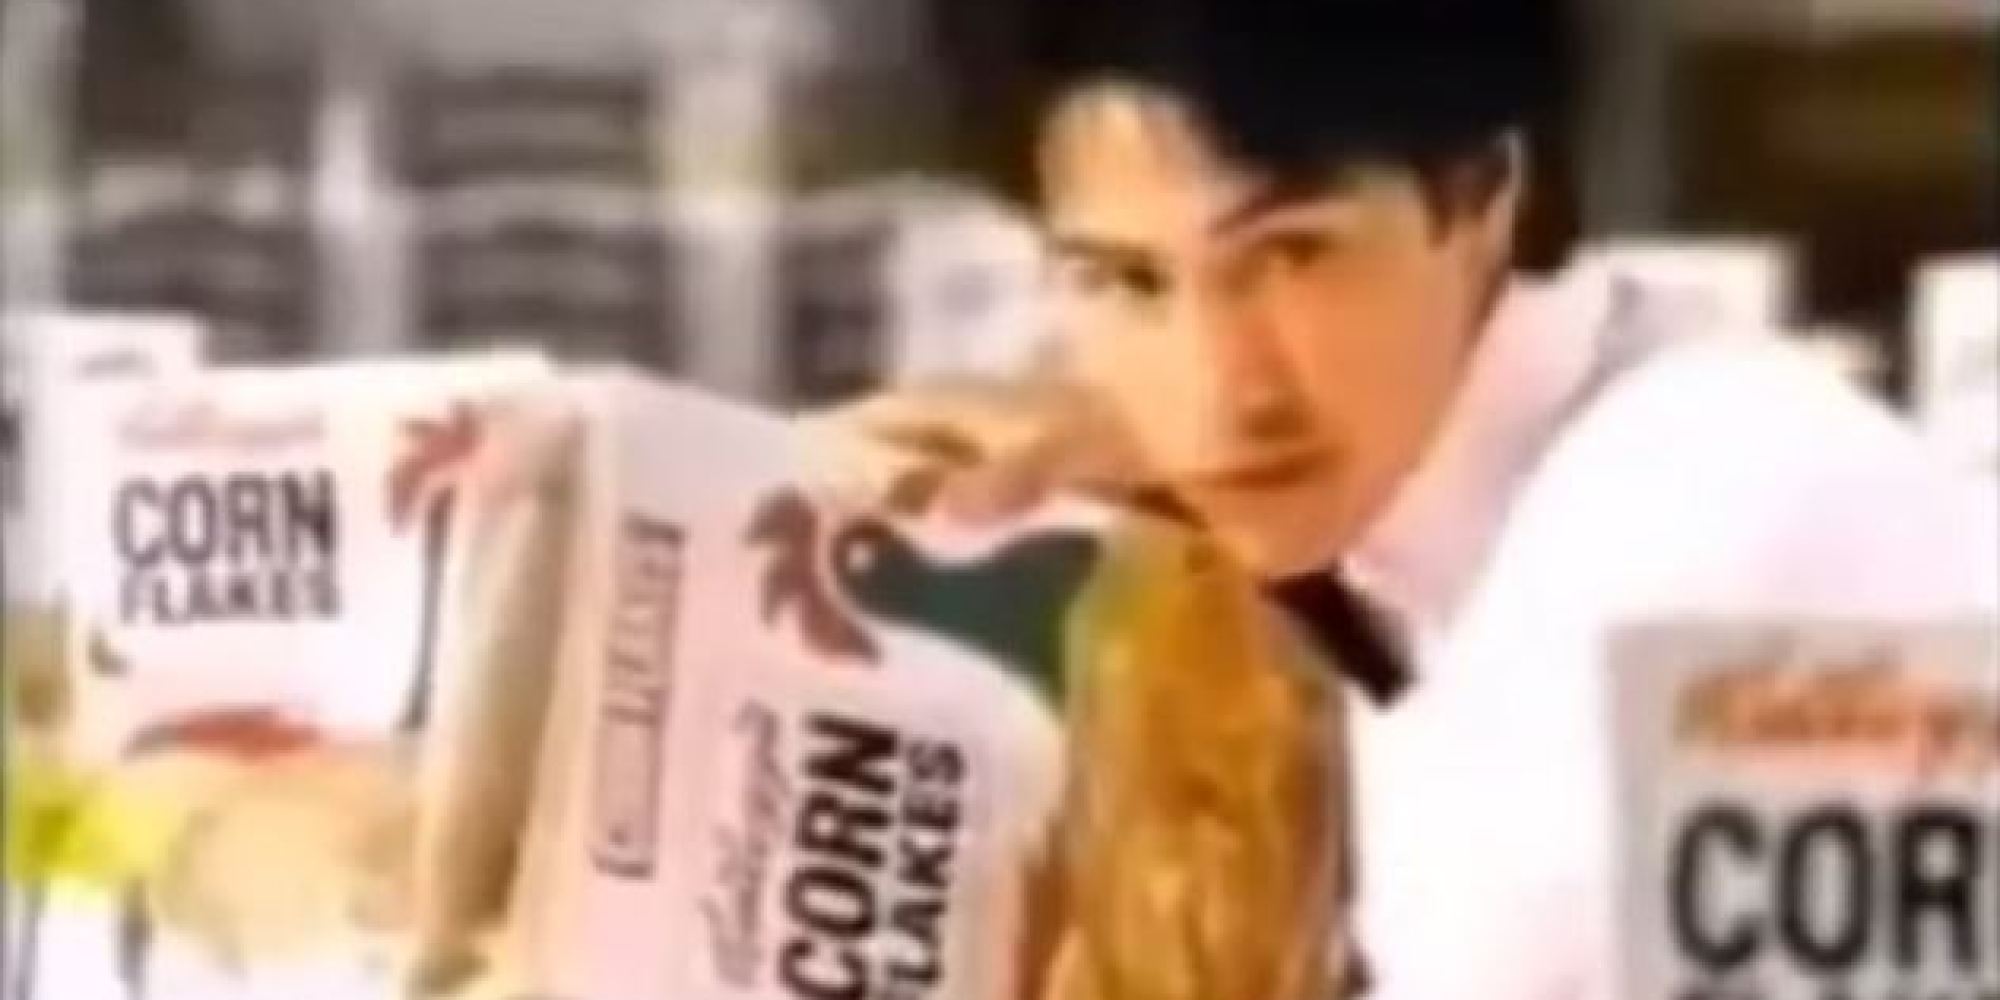 Celebrity Child Actors: Keanu Reeves Got His Start In These Canadian Commercials